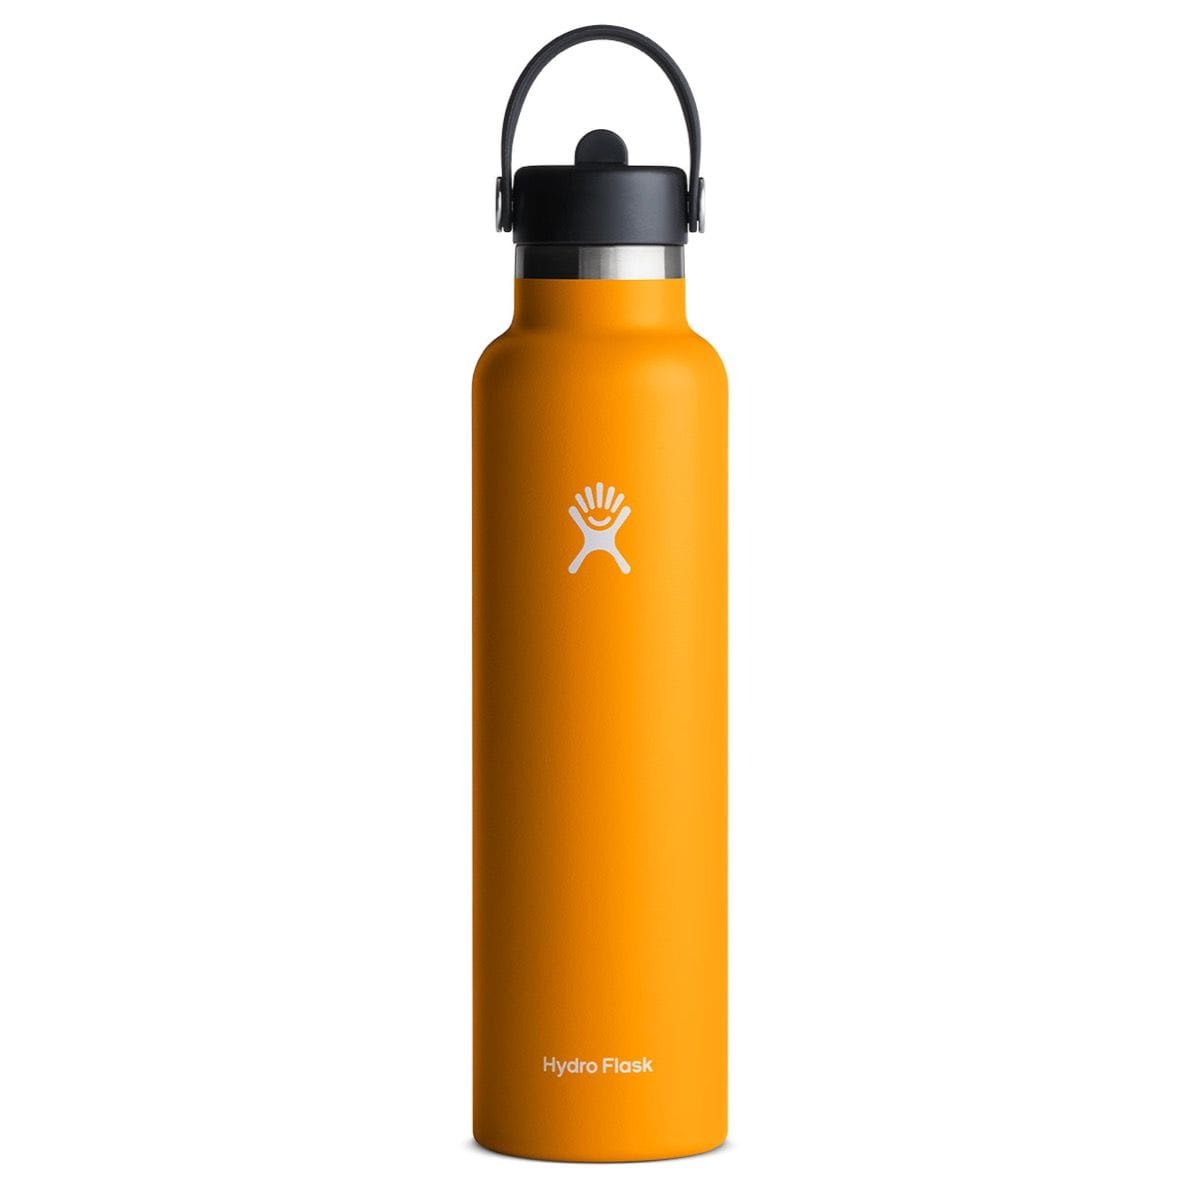 Hydro Flask Insulated Drinkware Hydro Flask 24 oz Standard Mouth Bottle with Flex Straw Cap - Starfish